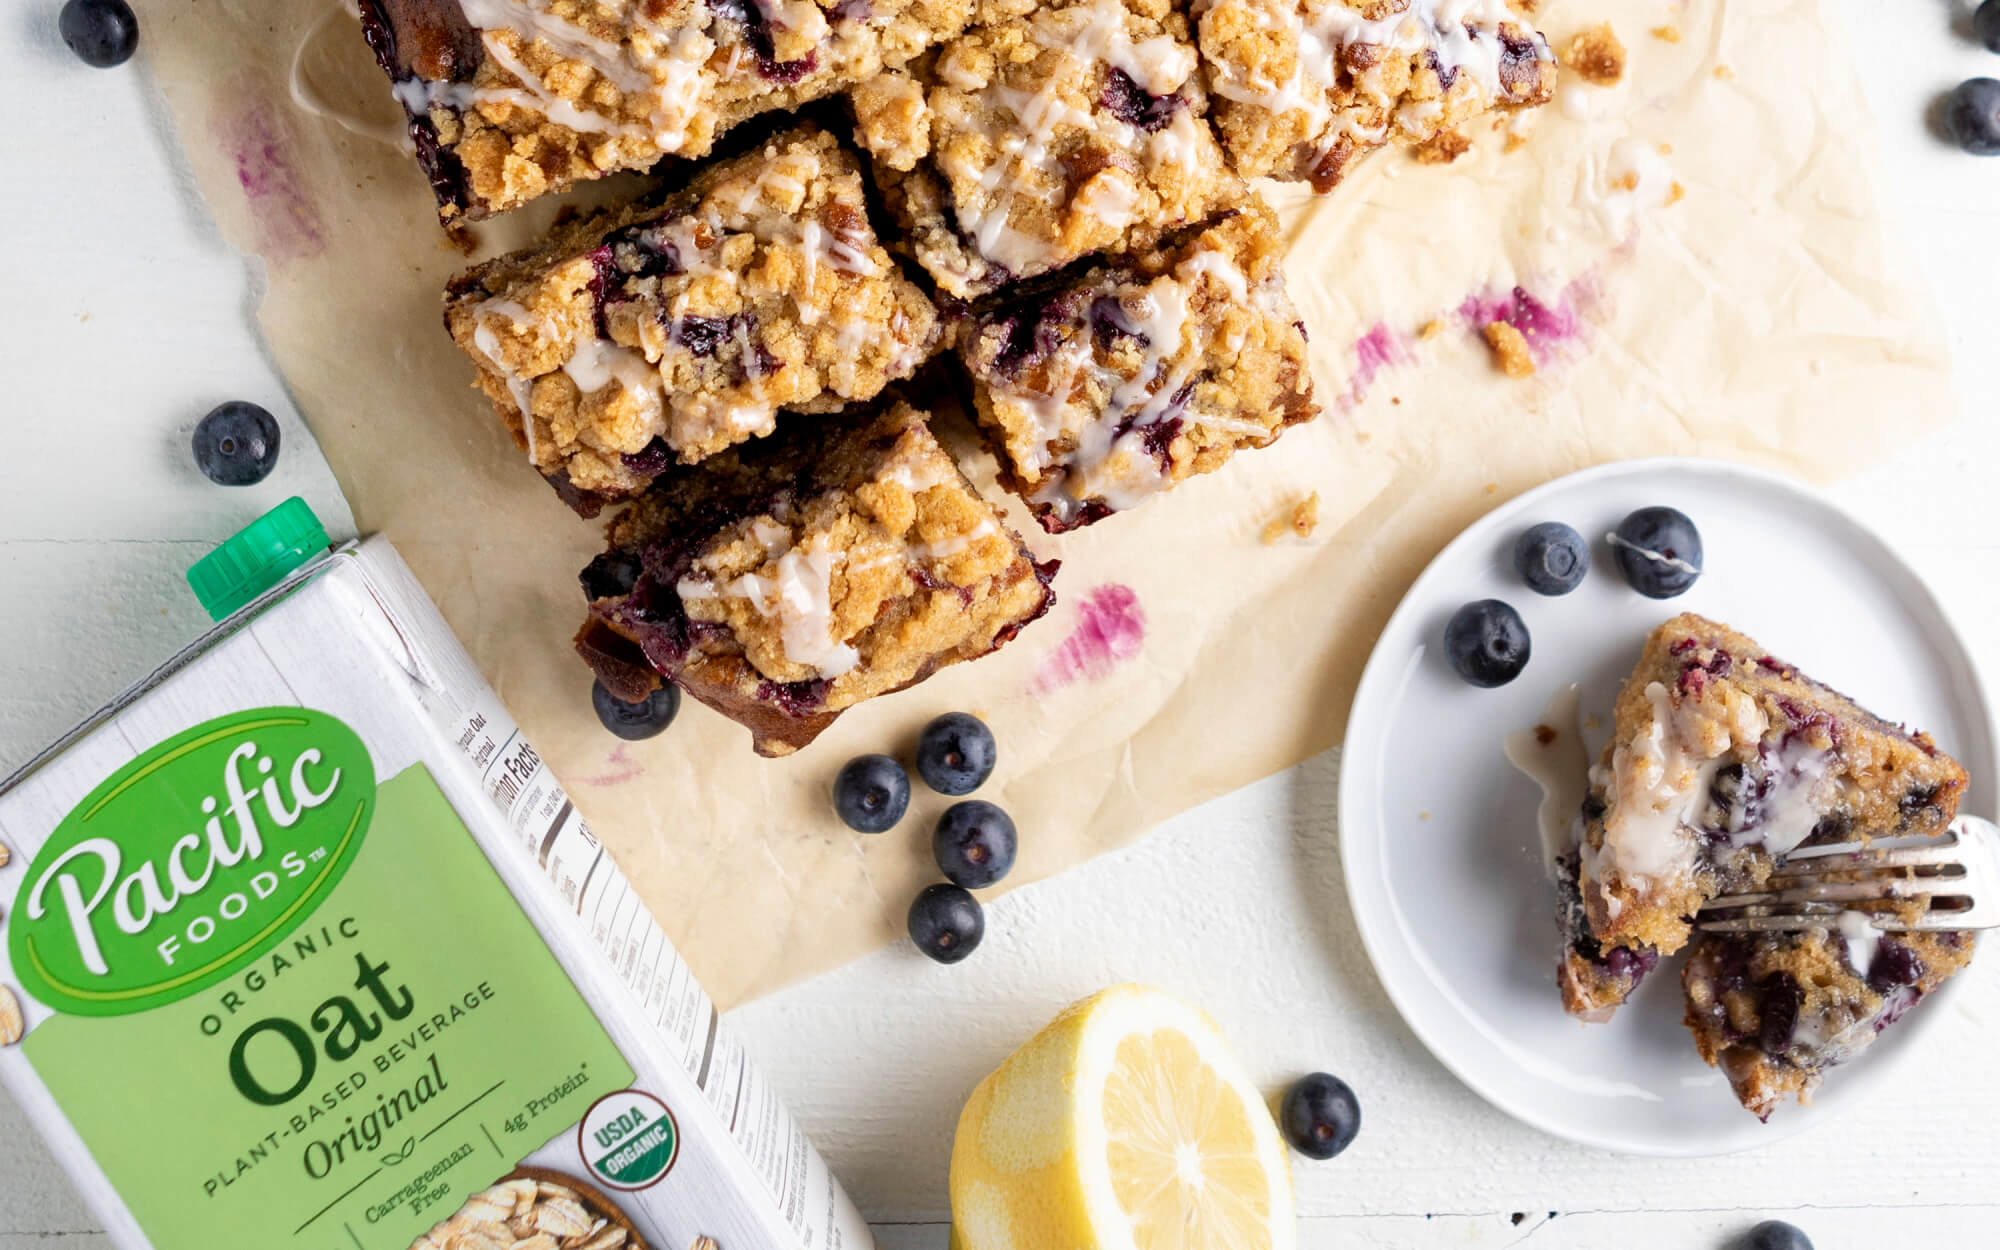 Pacific Foods Oat Milk Blueberry Bars